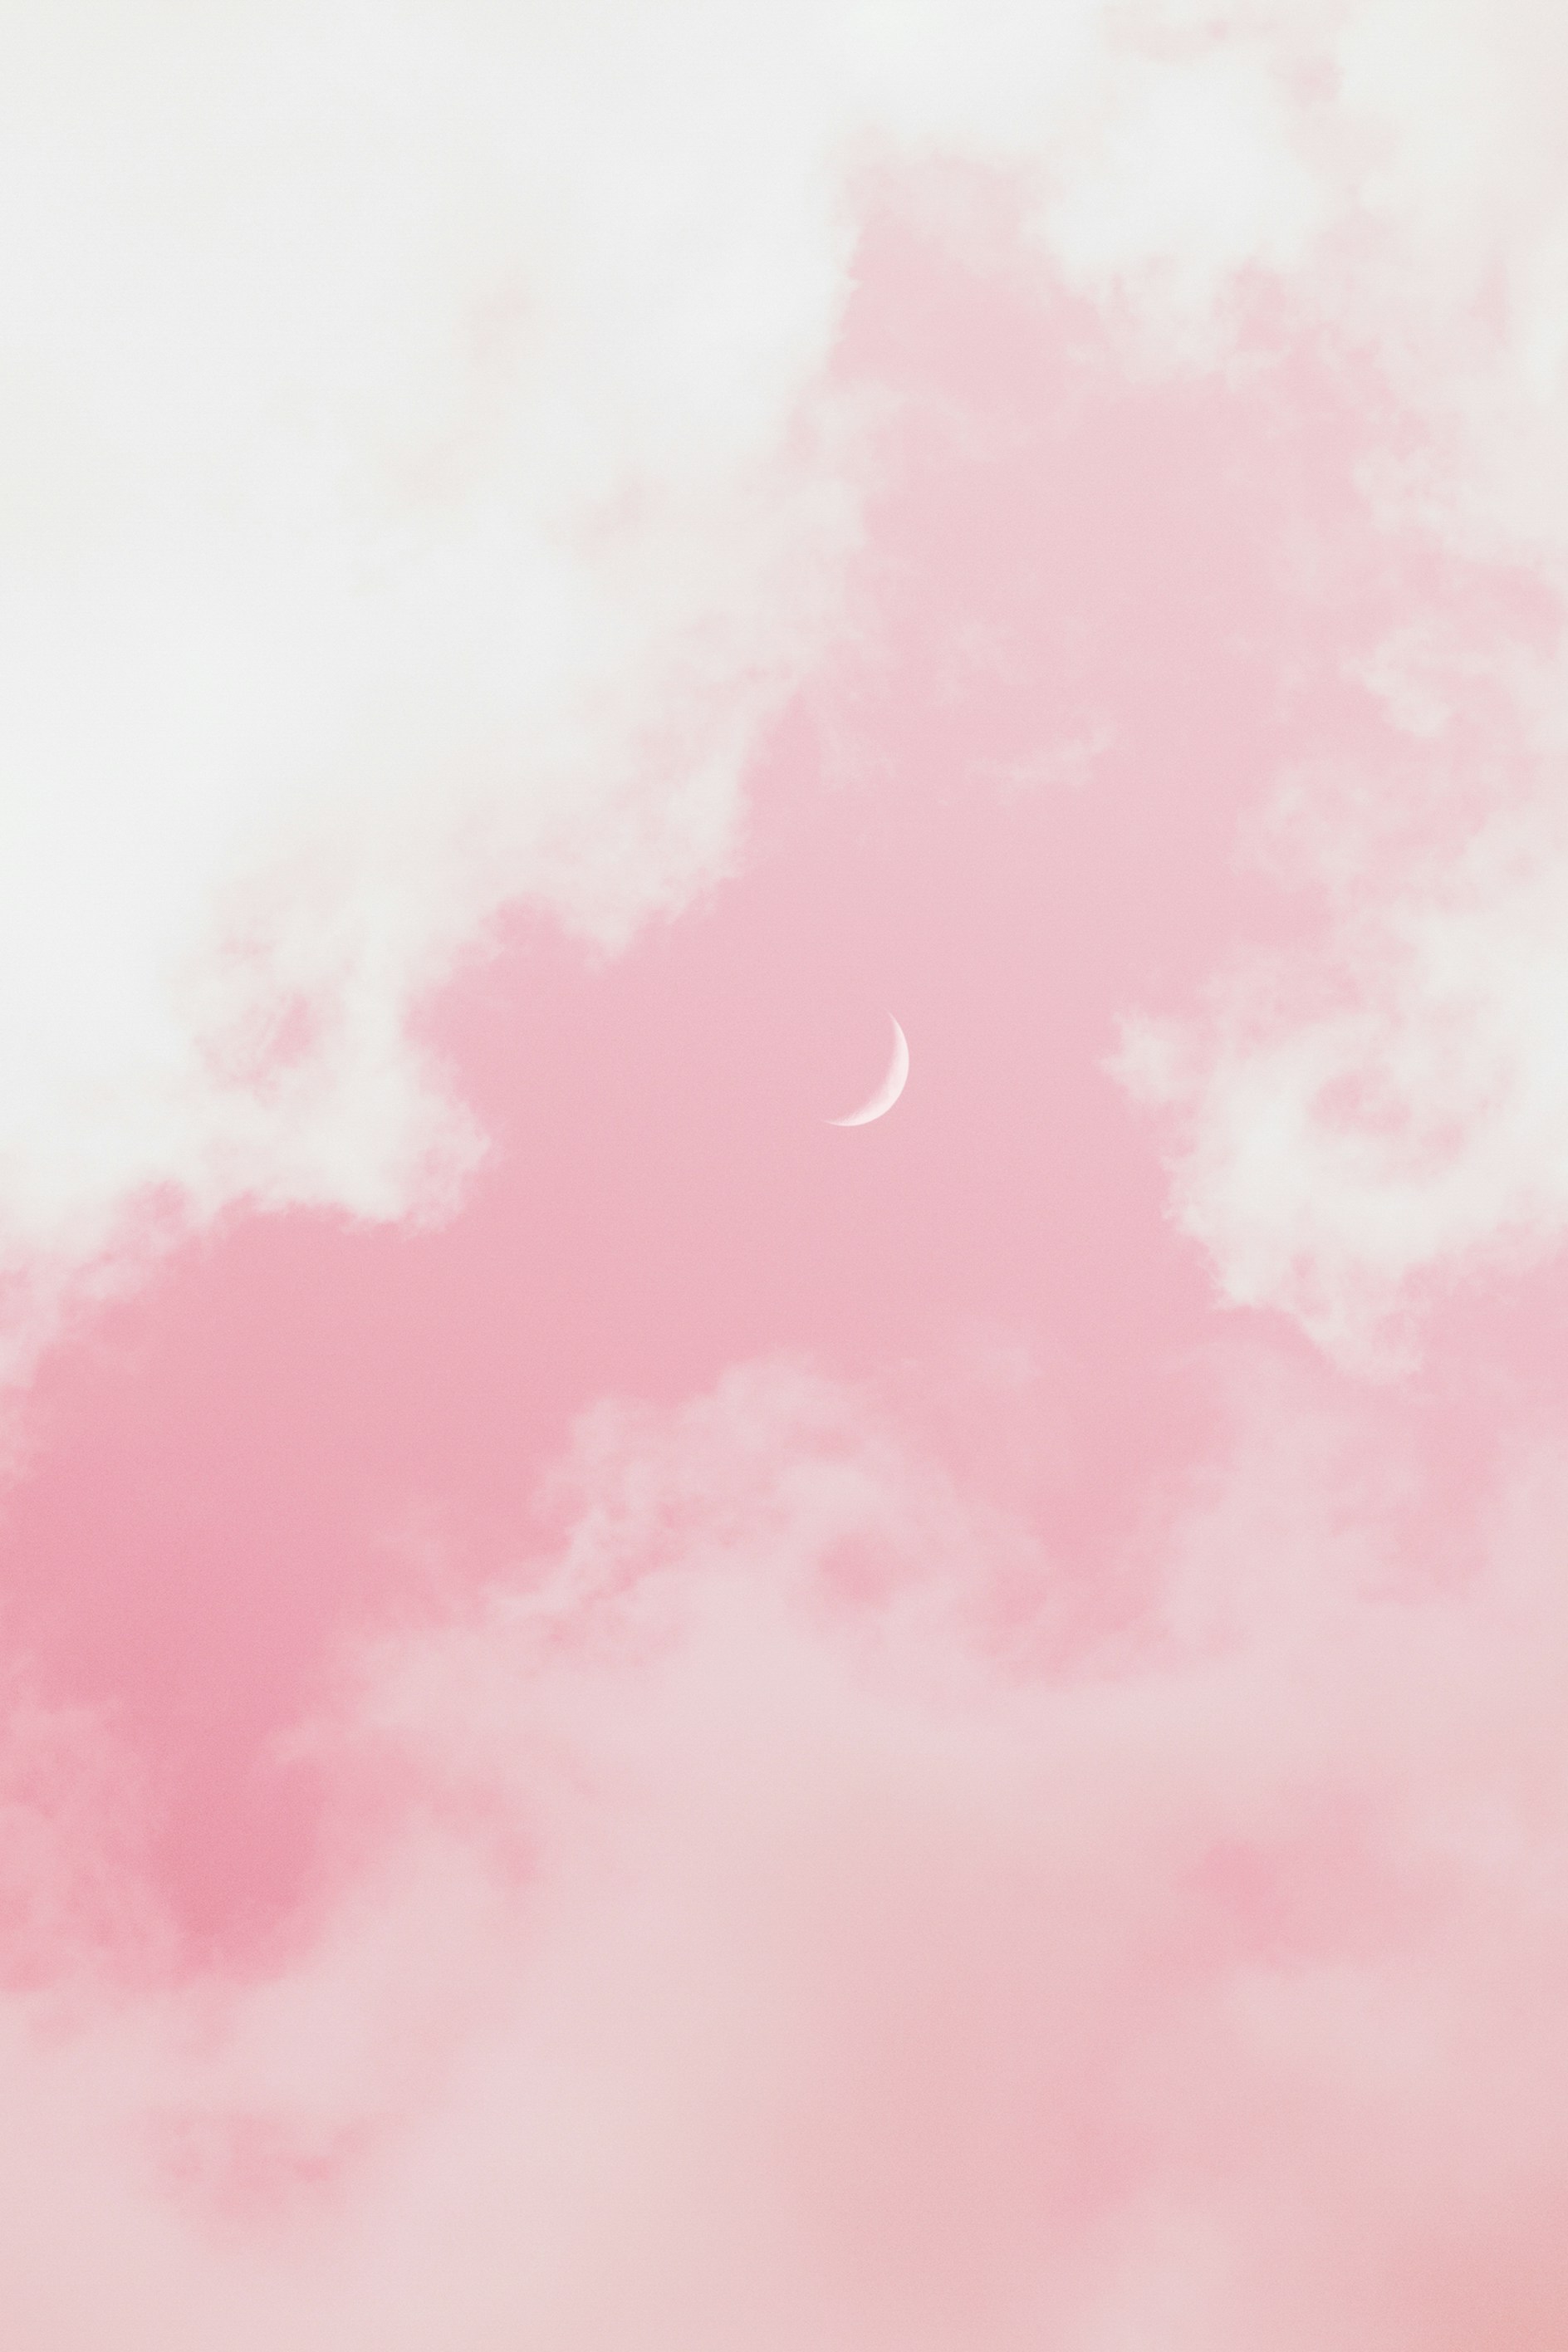 550+ Pink Aesthetic Pictures | Download ...